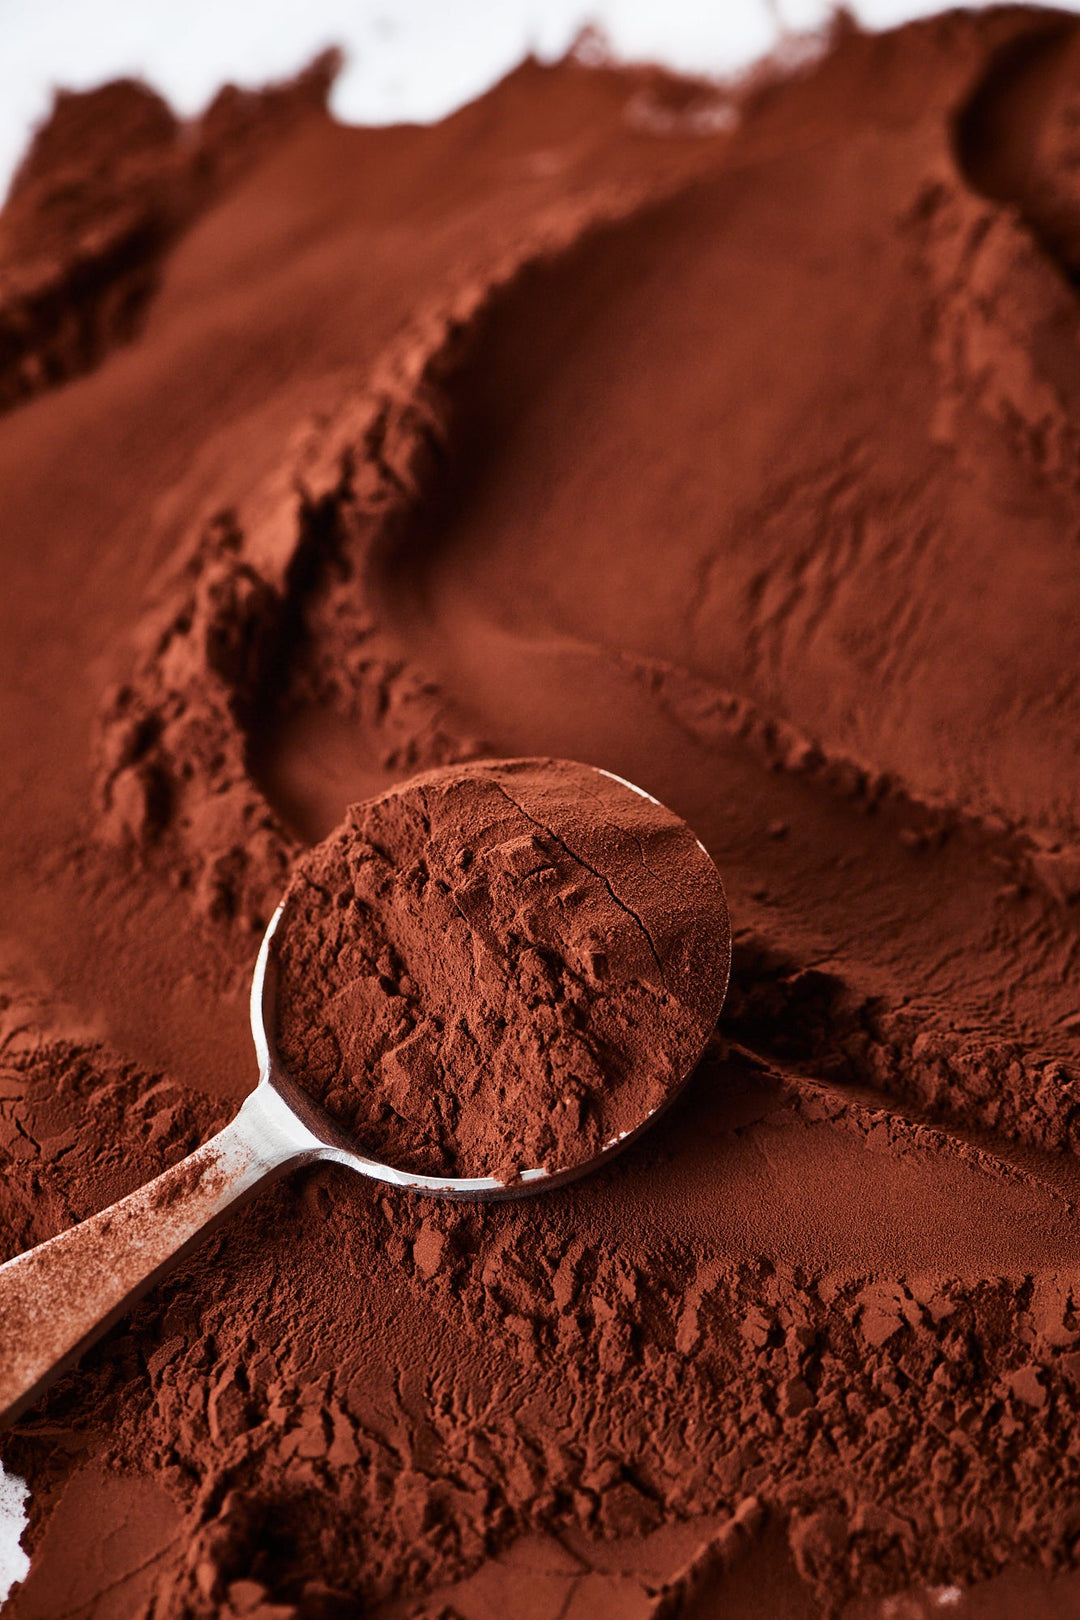 A spoonful of cocoa powder on a textured background of the same substance.